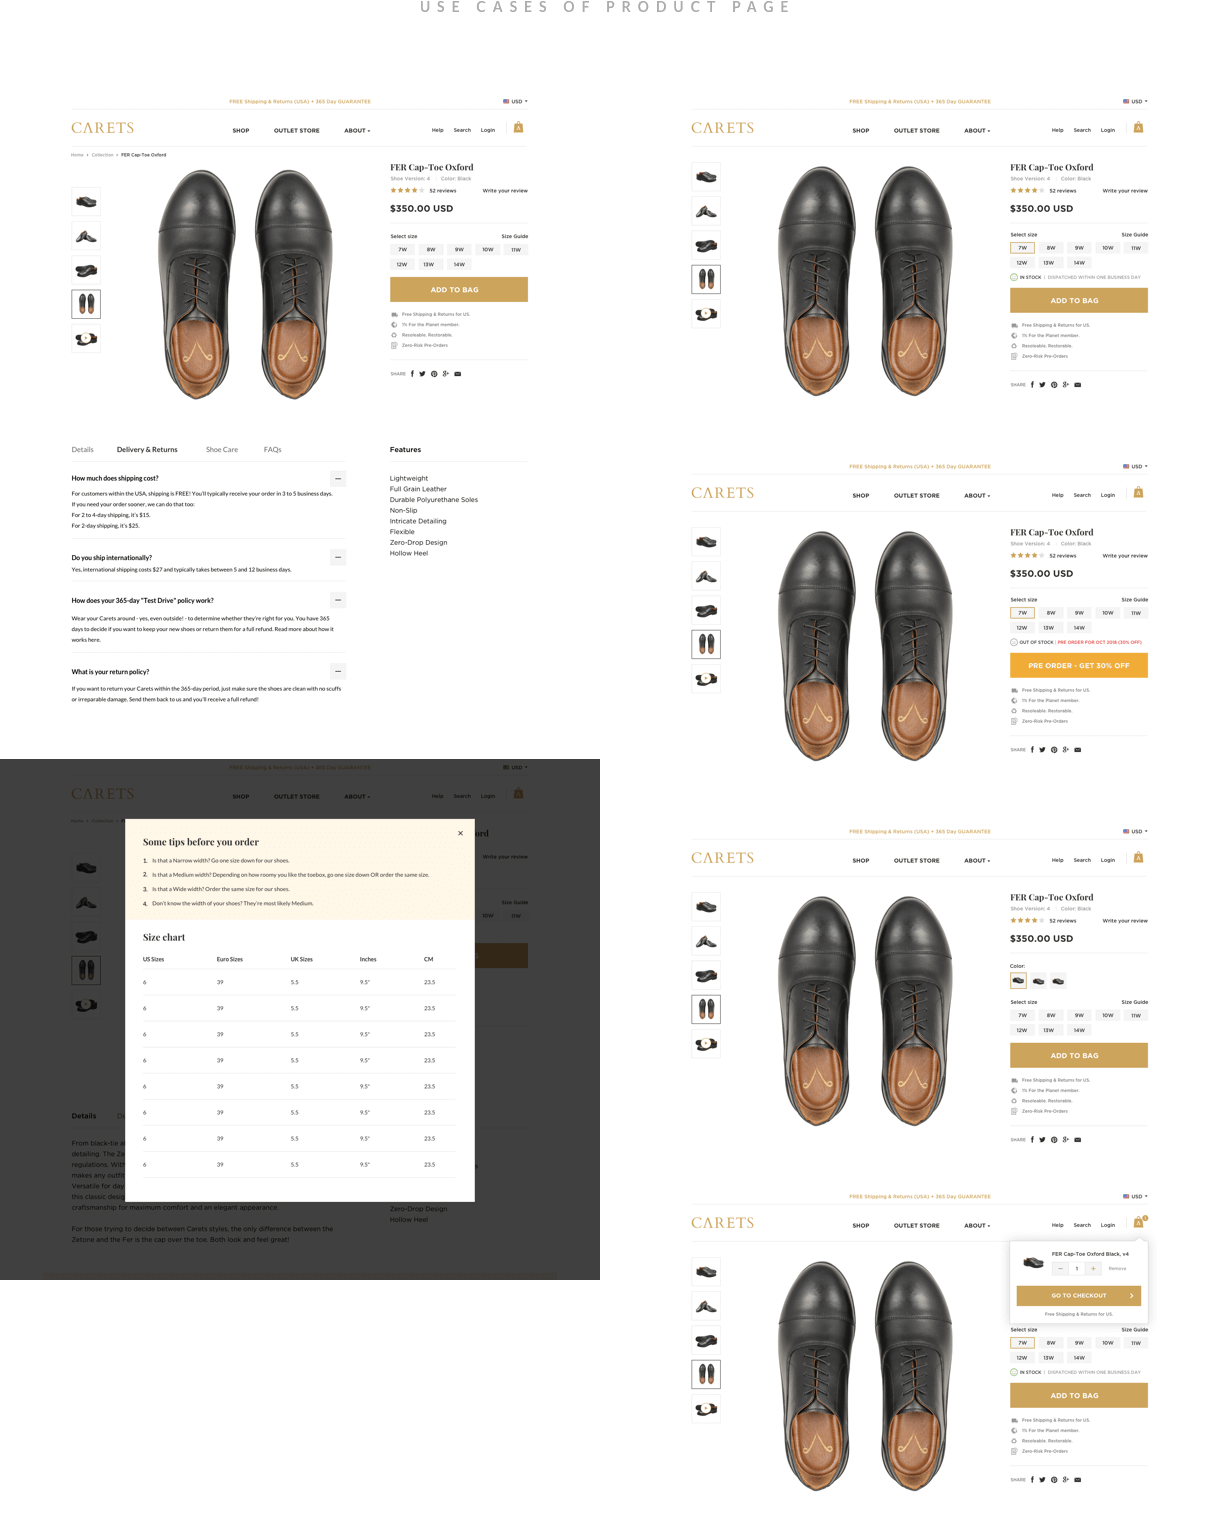 Product page cases